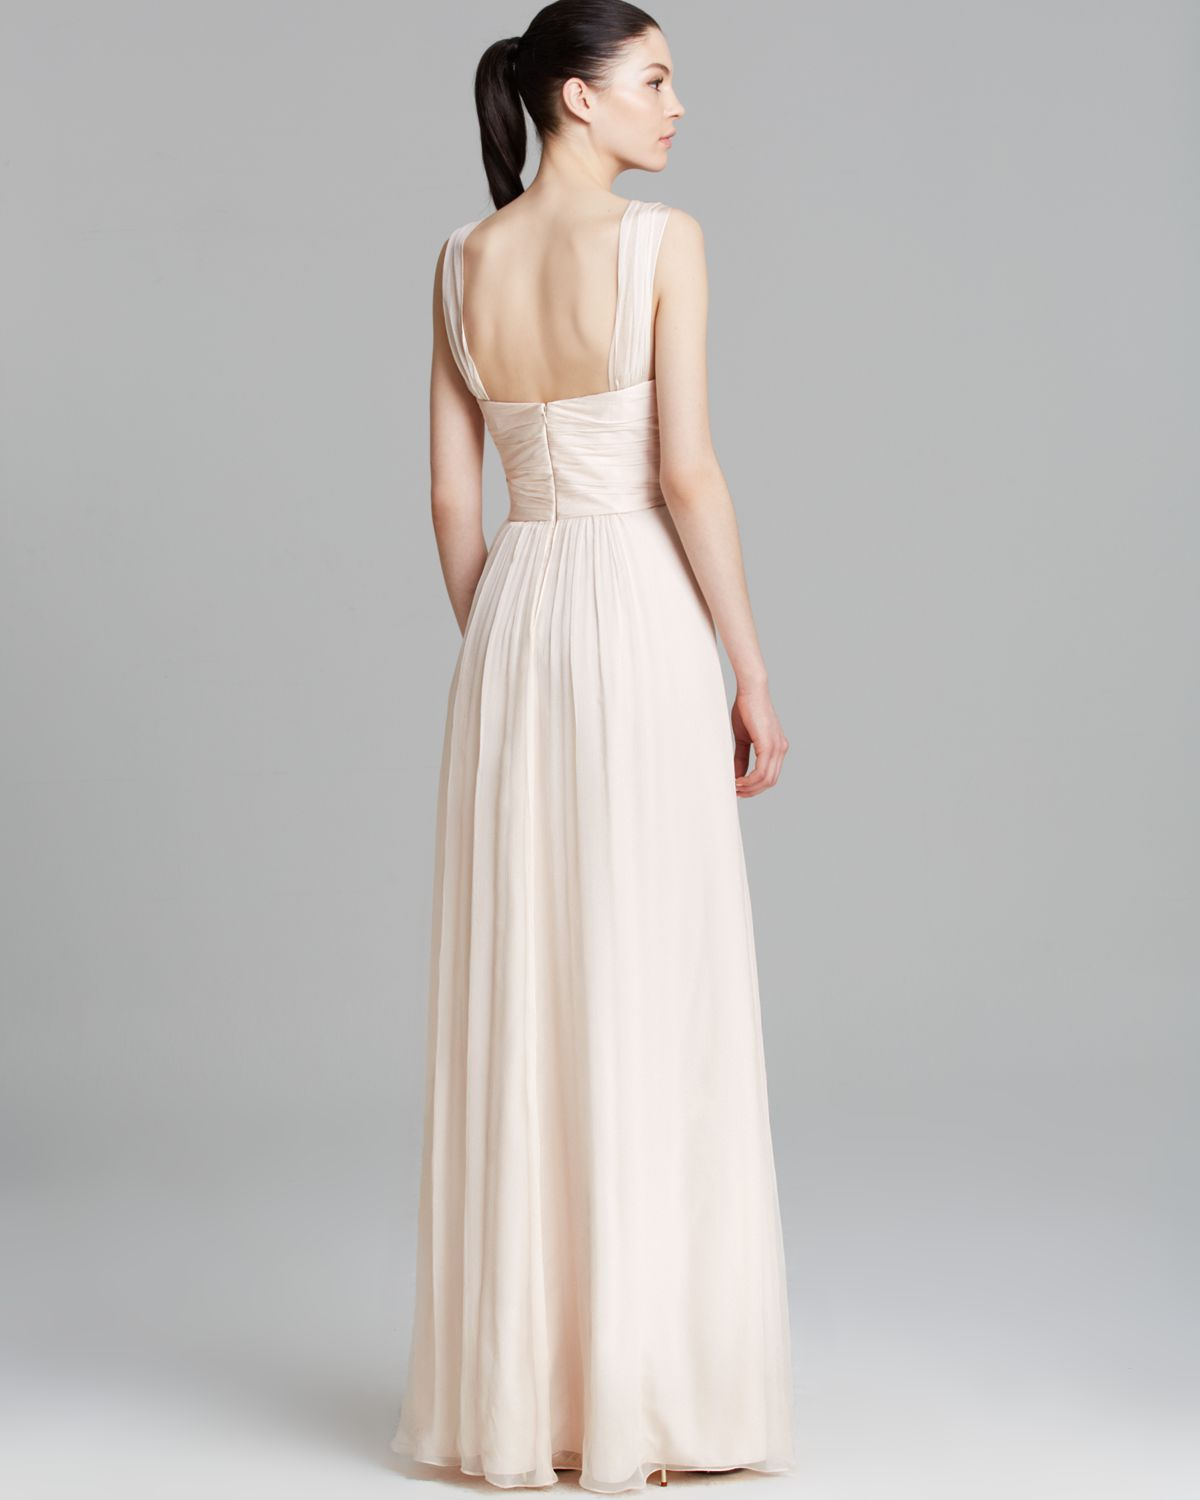 Lyst - Amsale Gown Off The Shoulder Sweetheart Neckline Chiffon in Natural